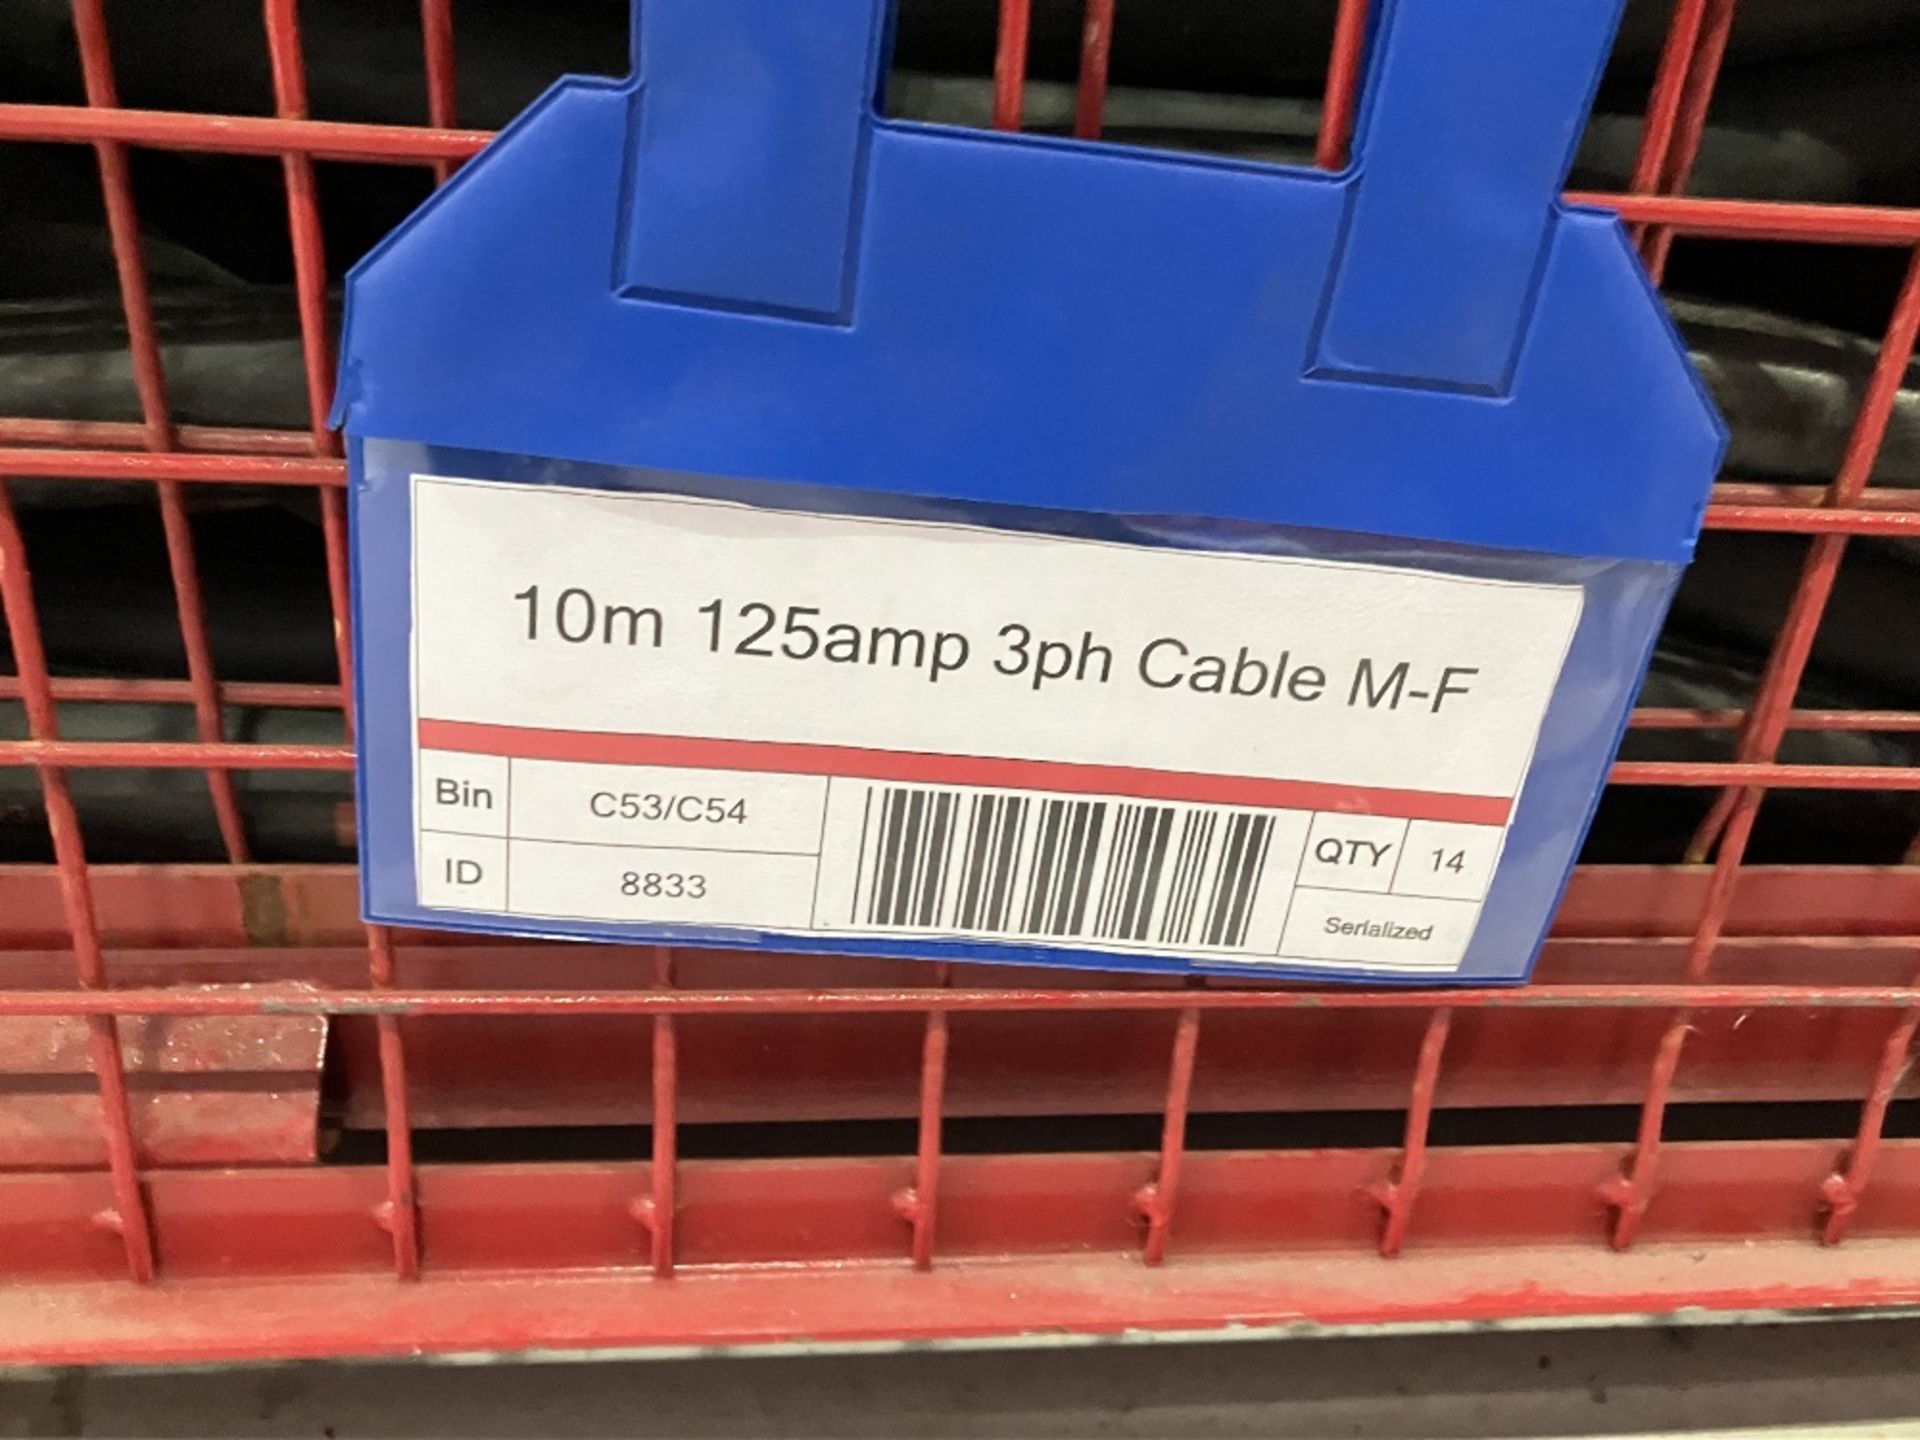 Large Quantity of 10M 125amp 3ph Cable M-F with Steel Fabricated Stillage - Image 5 of 5